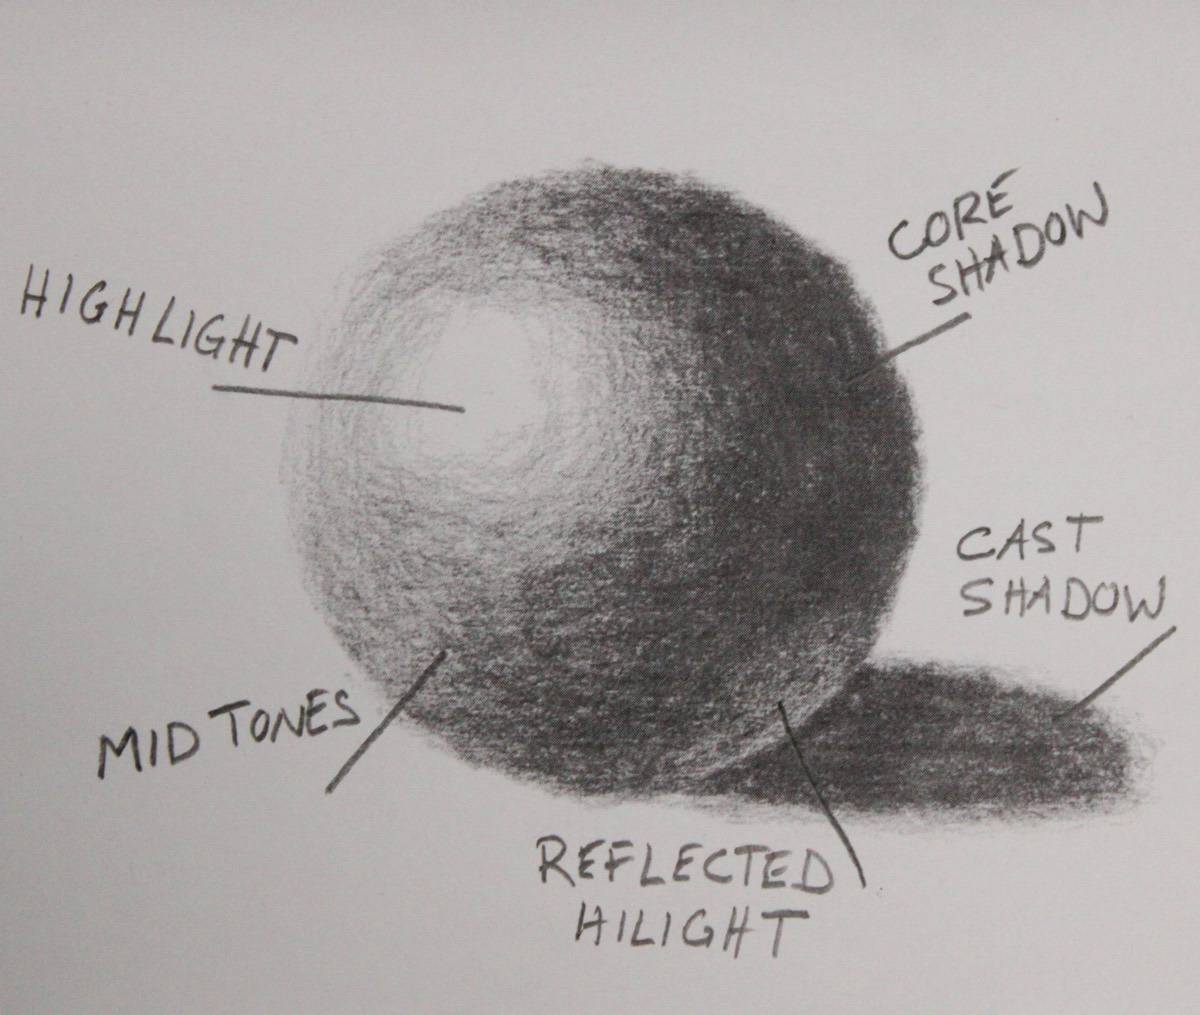 Highlights, mid tones, core shadow, cast shadow and reflected highlights in a diagram of a pencil drawn sphere